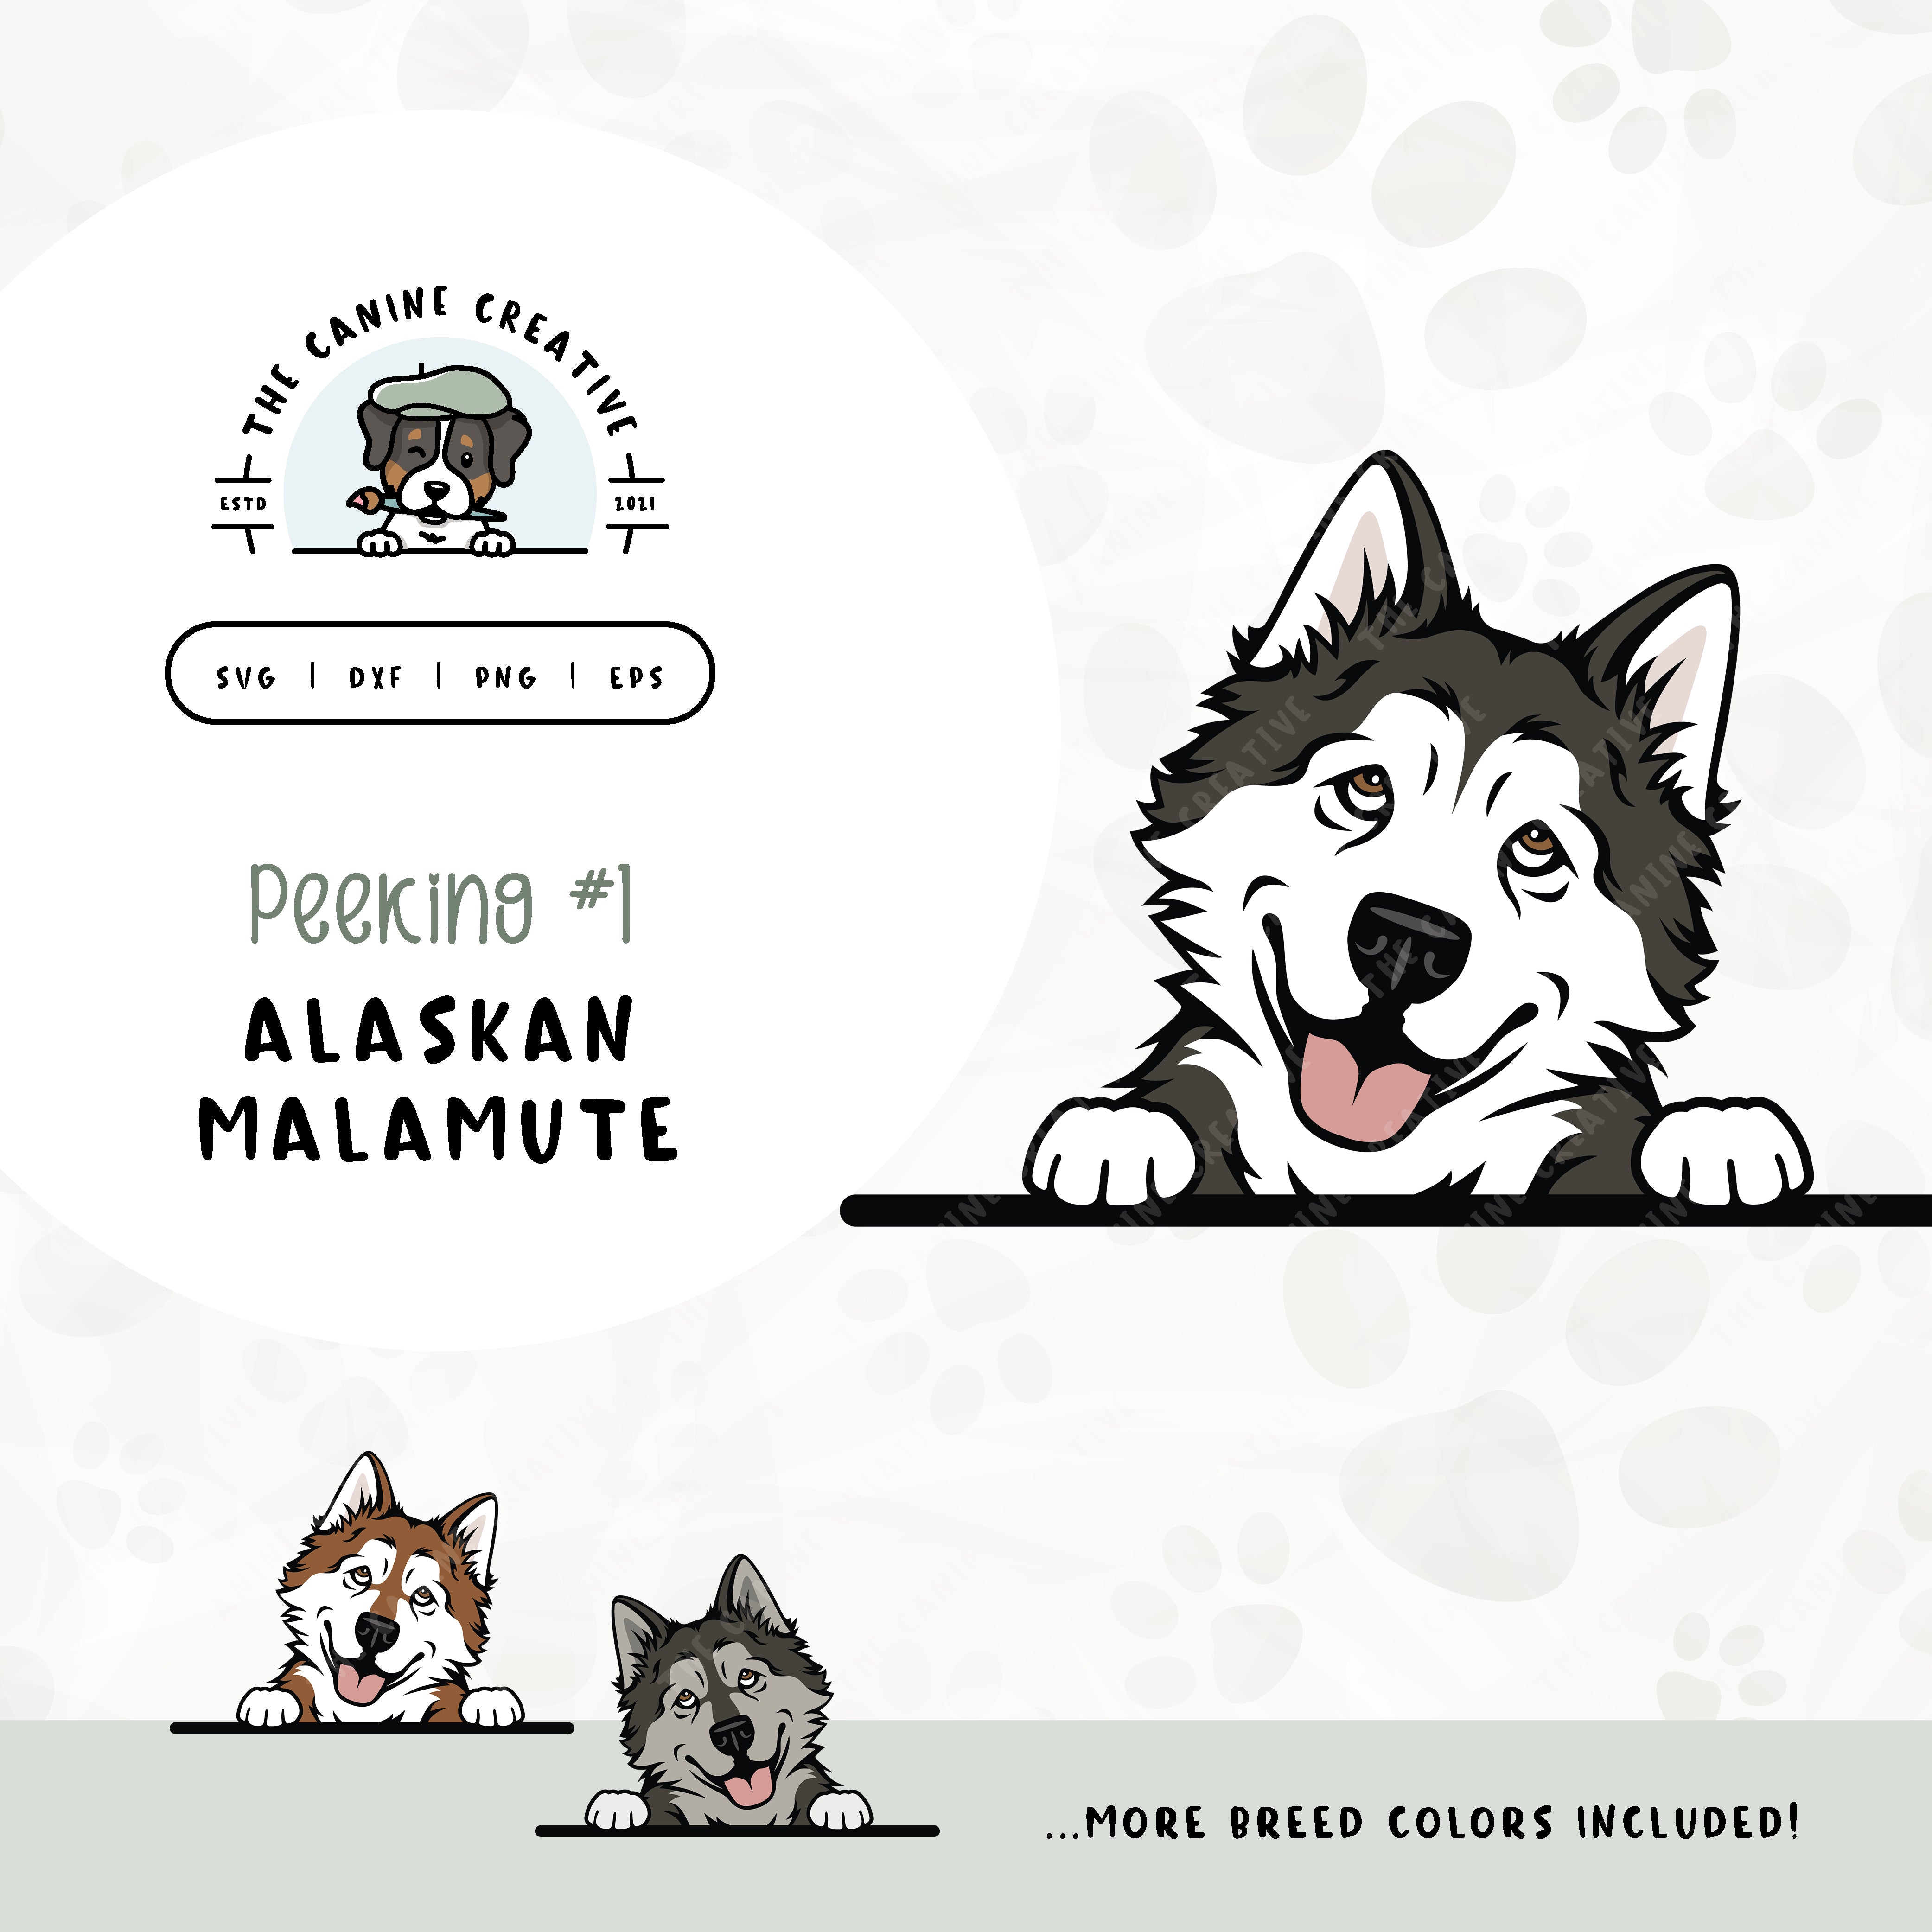 This illustrated design features a peeking Alaskan Malamute. File formats include: SVG, DXF, PNG, and EPS.